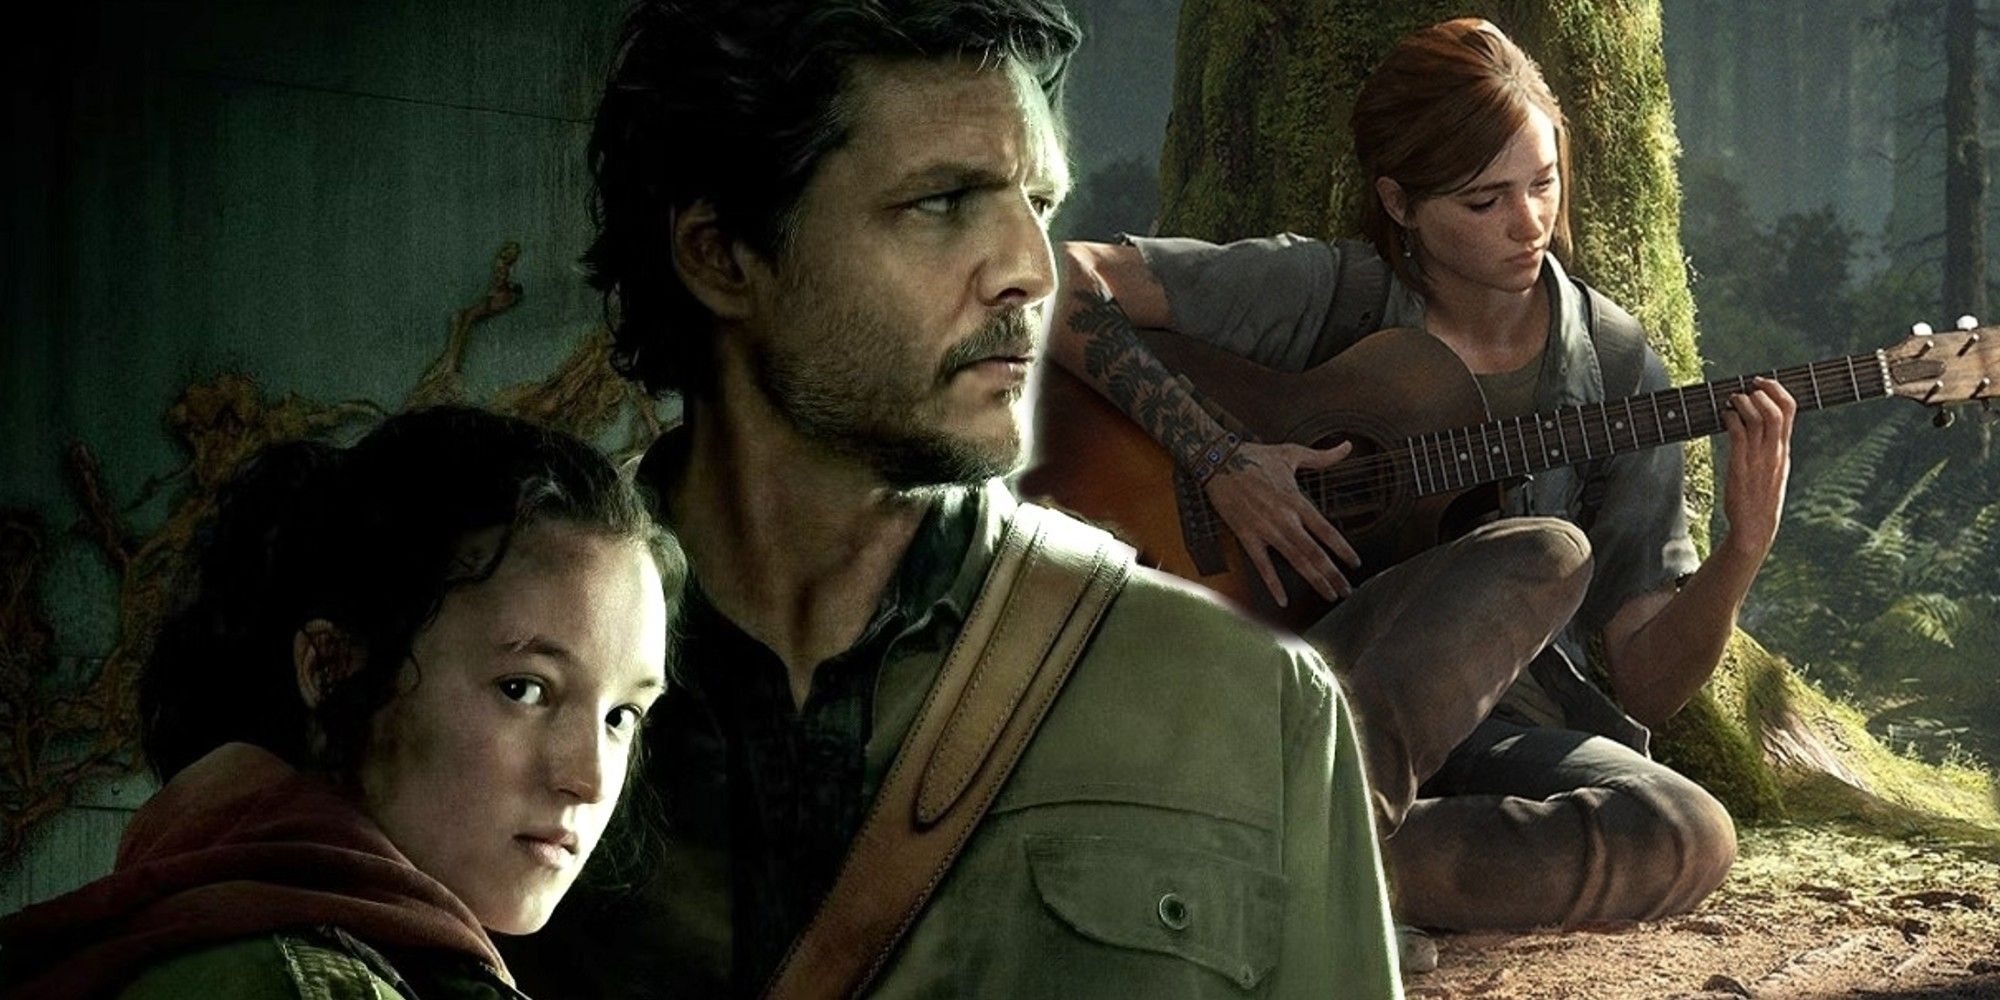 Pedro Pascal and Bella Ramsay as Joel and Ellie in HBO's The Last of Us, next to a promotional piece for The Last of Us 2, which shows Ellie sitting in a tree playing guitar.